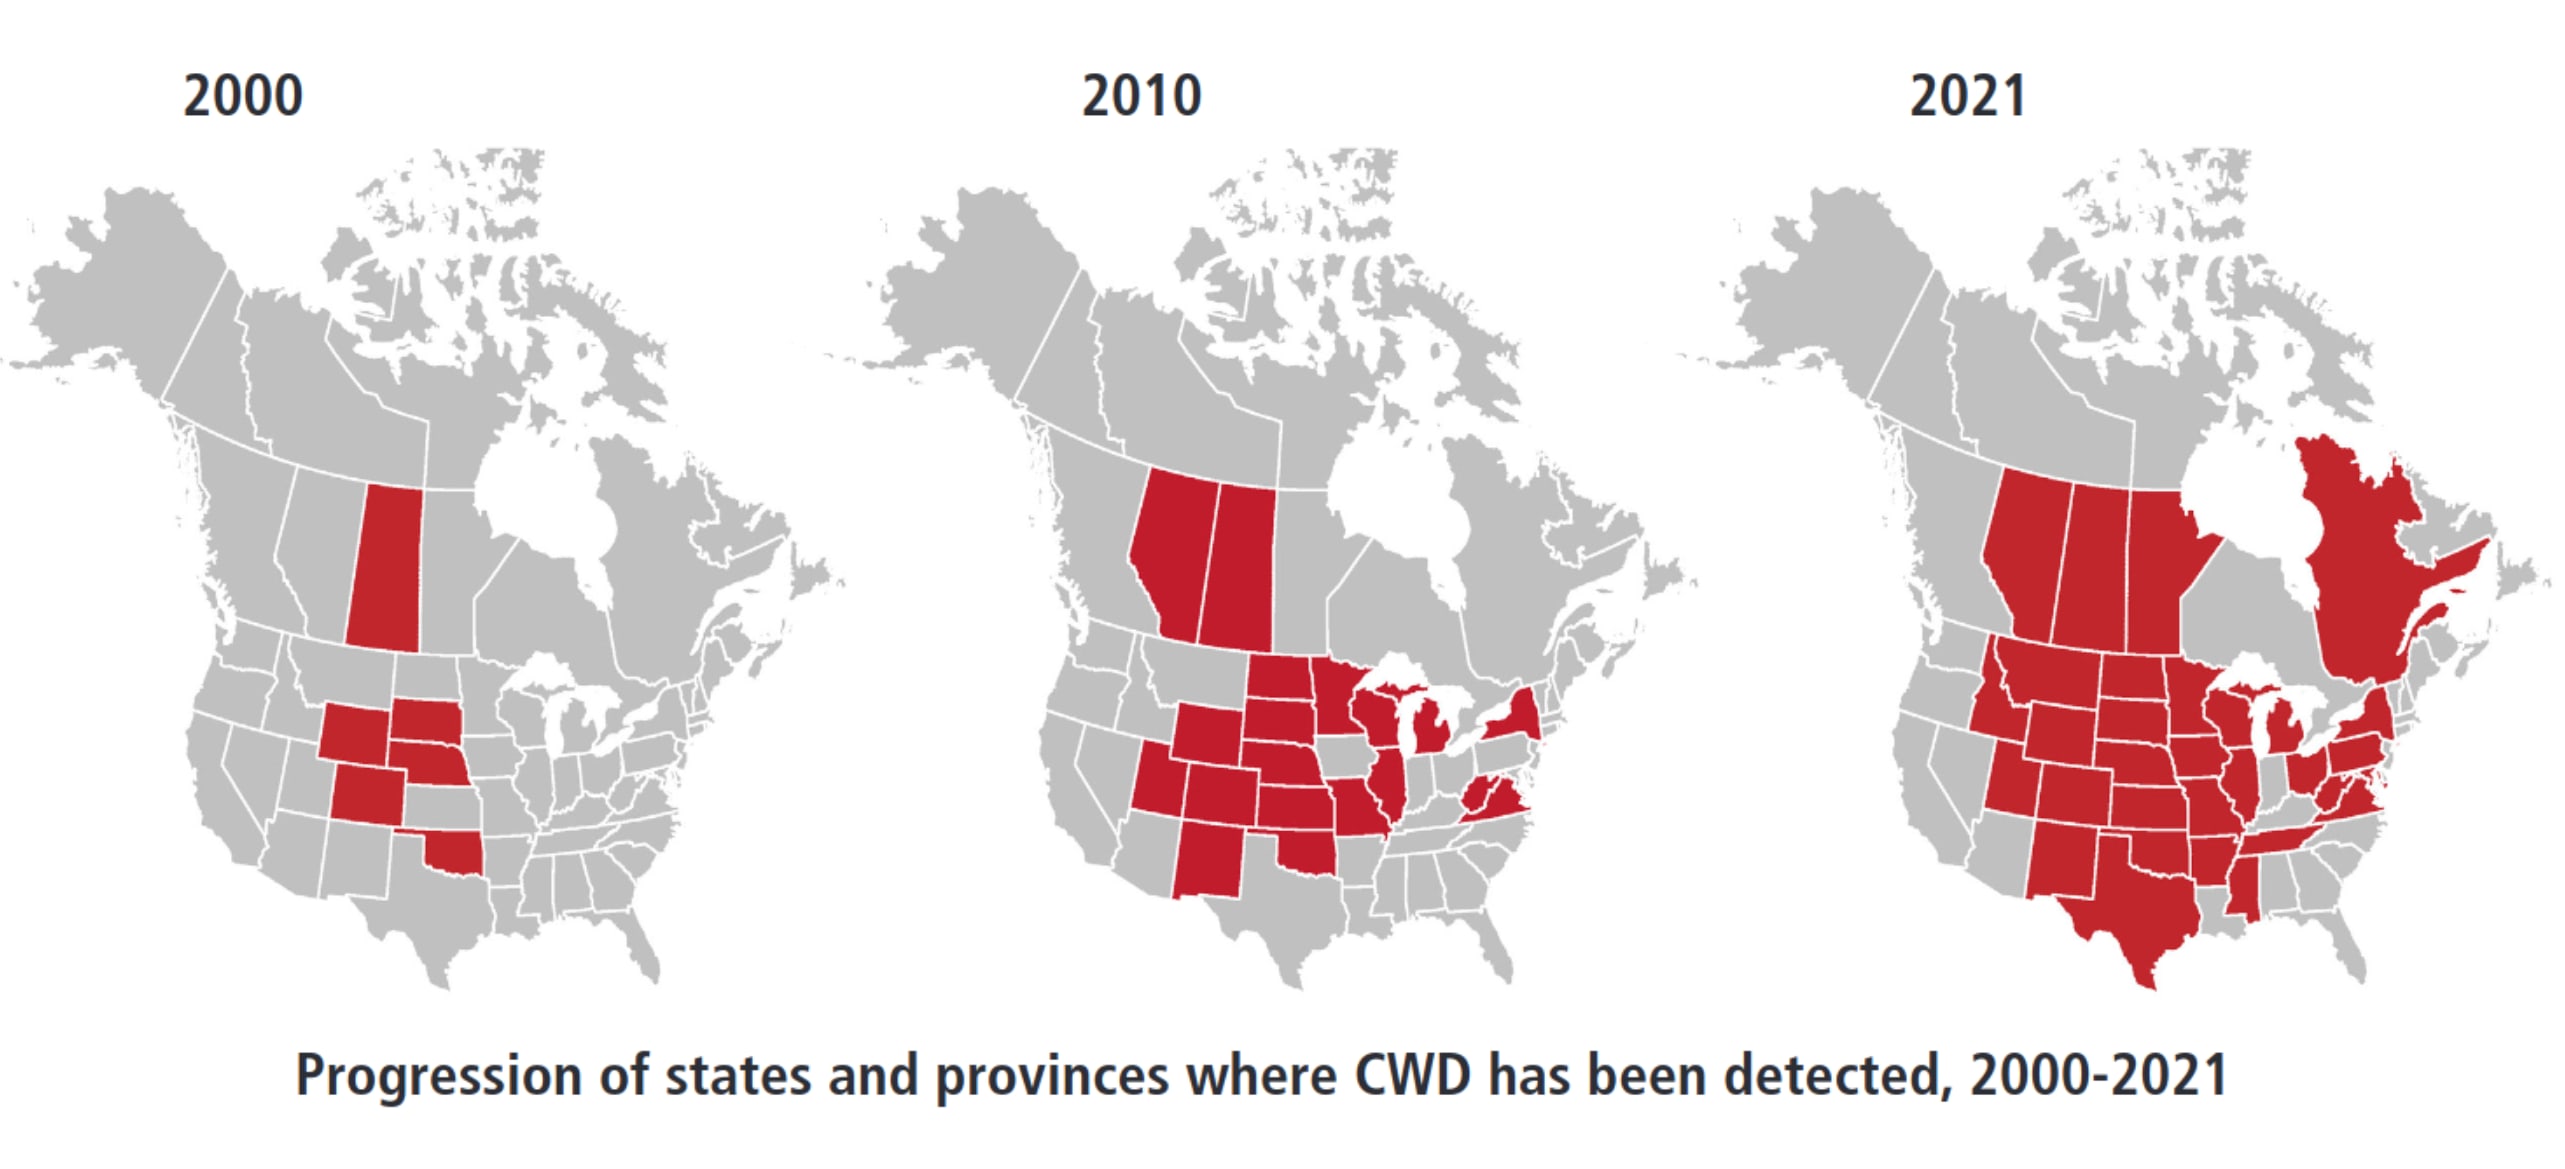 Maps of north America from 2000 to 2021 show the geographic progression of where Chronic Wasting Disease has been detected, starting in a few central states and spreading to much of the interior and east coast of the continent.